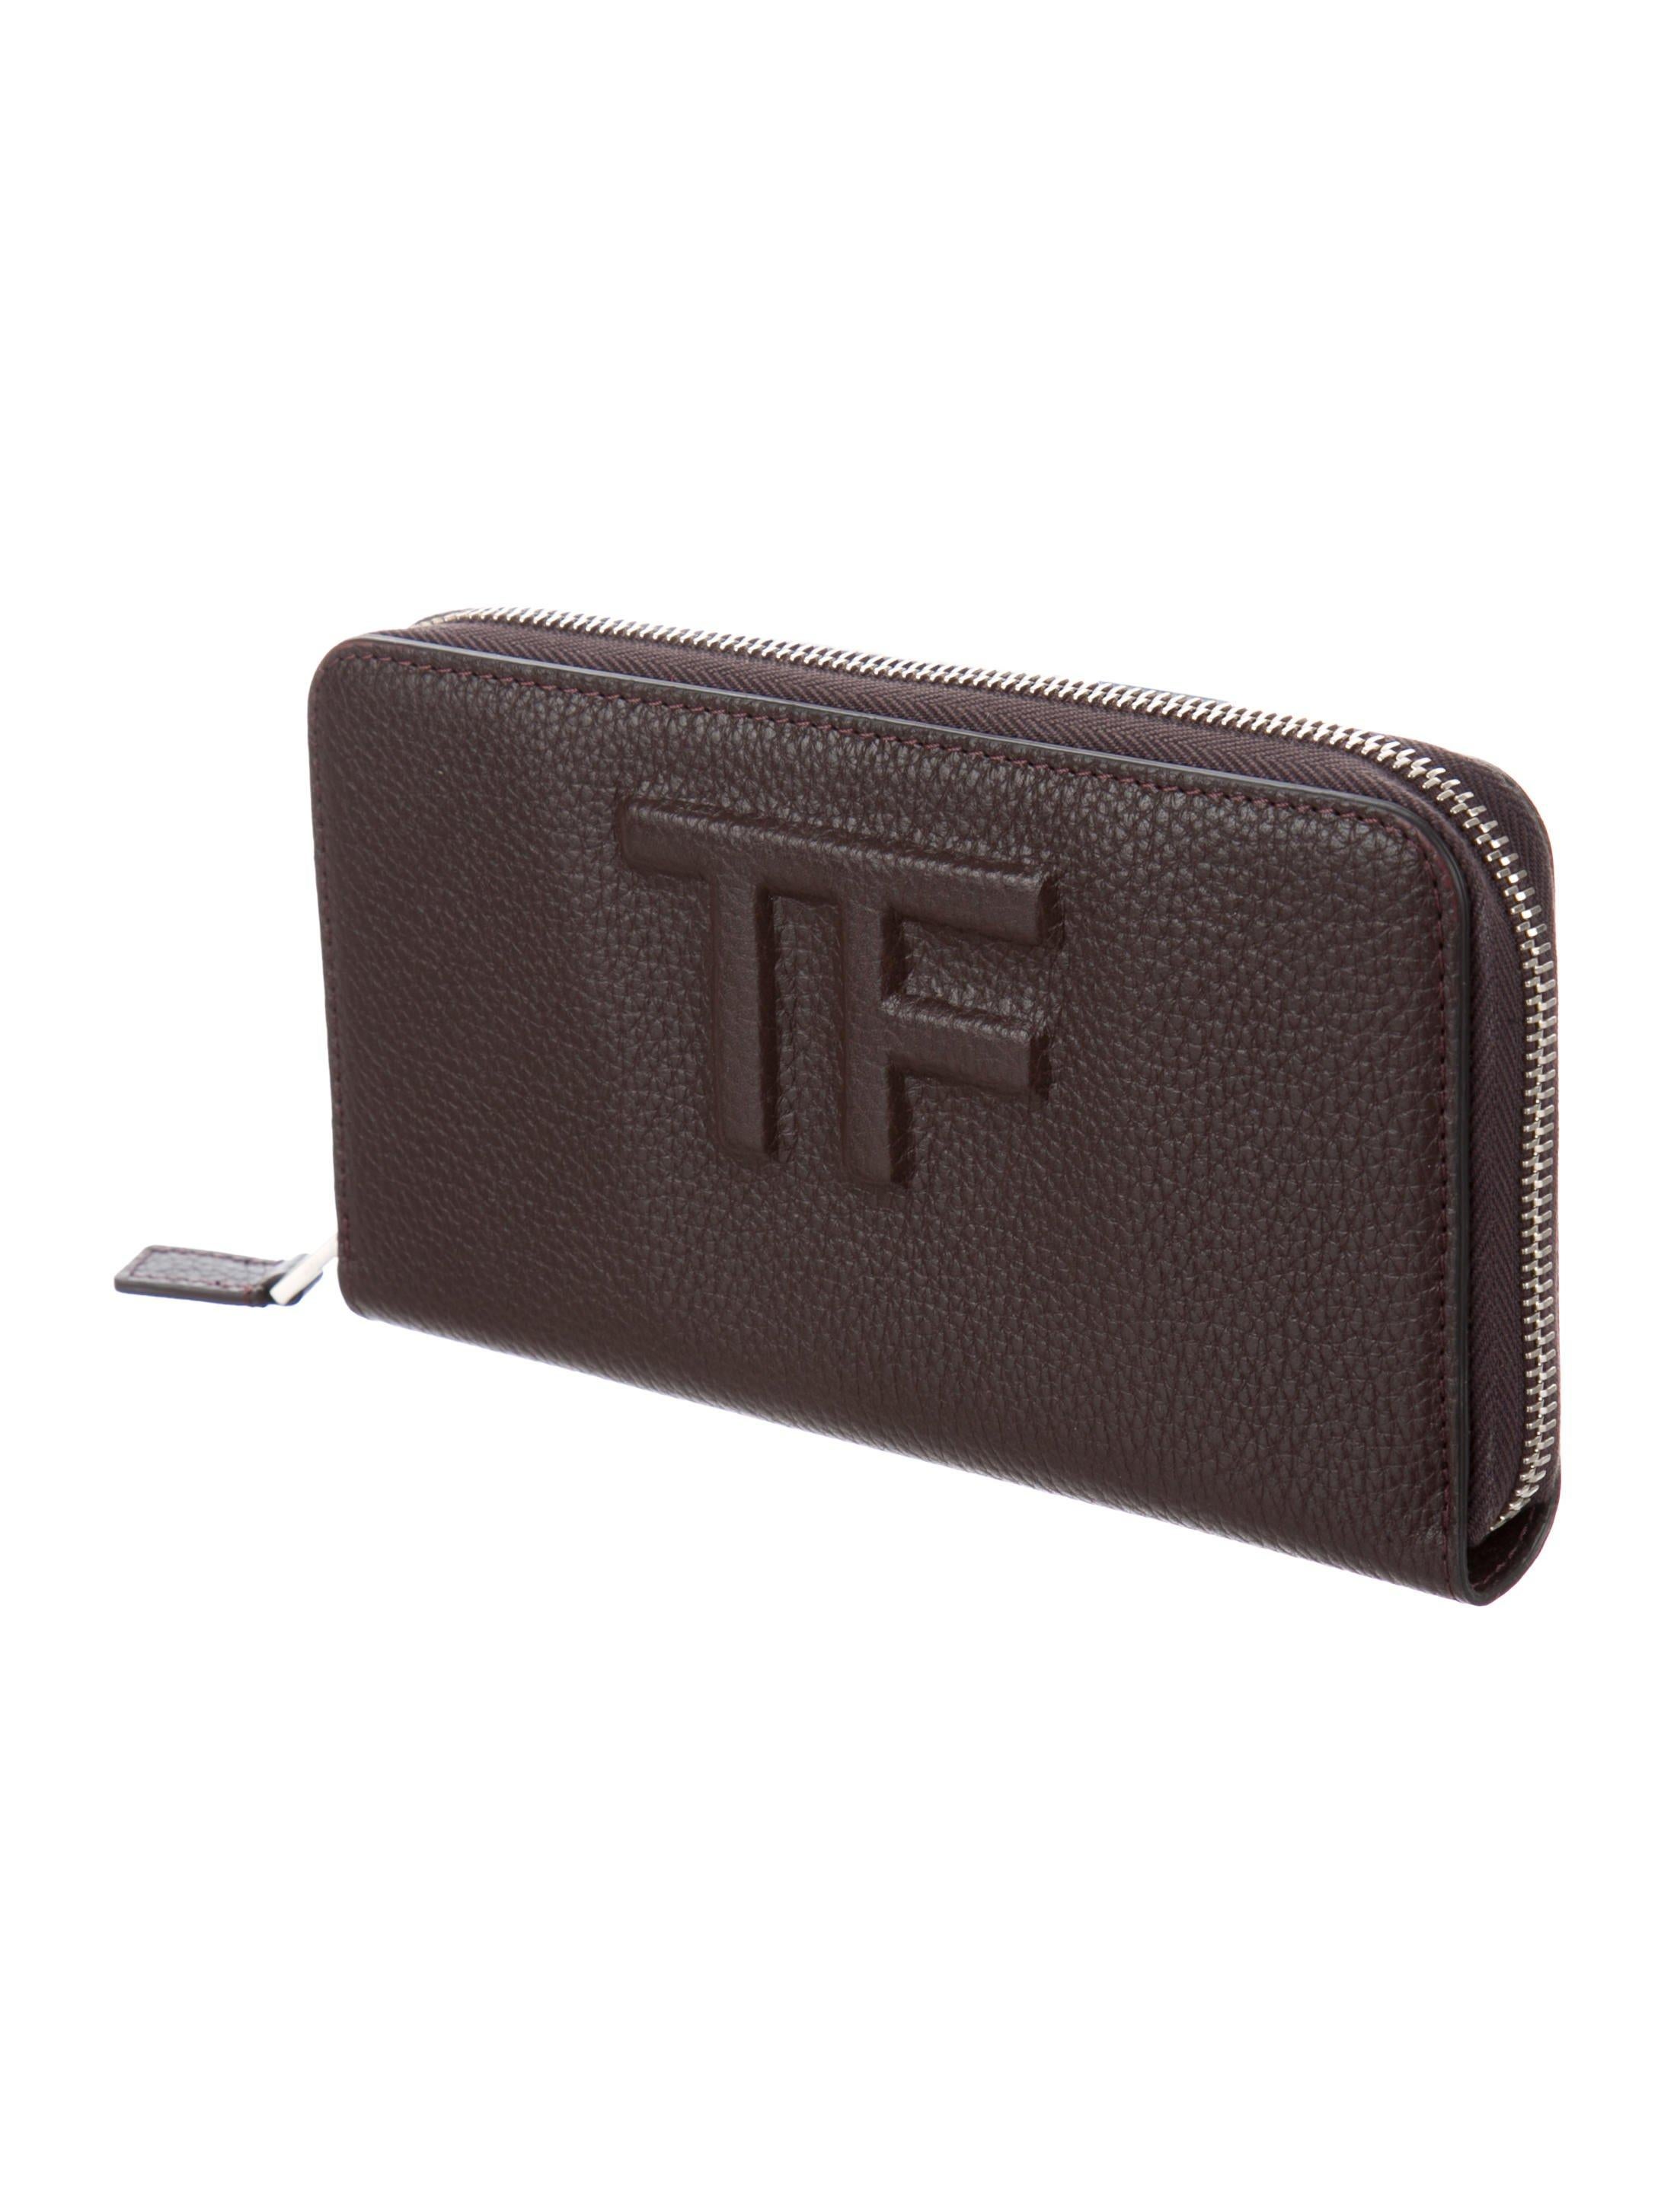 Tom Ford NEW Brown Leather Logo Zip Around Clutch Wallet 

Leather 
Silver tone hardware
Leather lining
Made in Italy
Features cash slots, zipper pocket, twelve card slots 
Measures 7.5